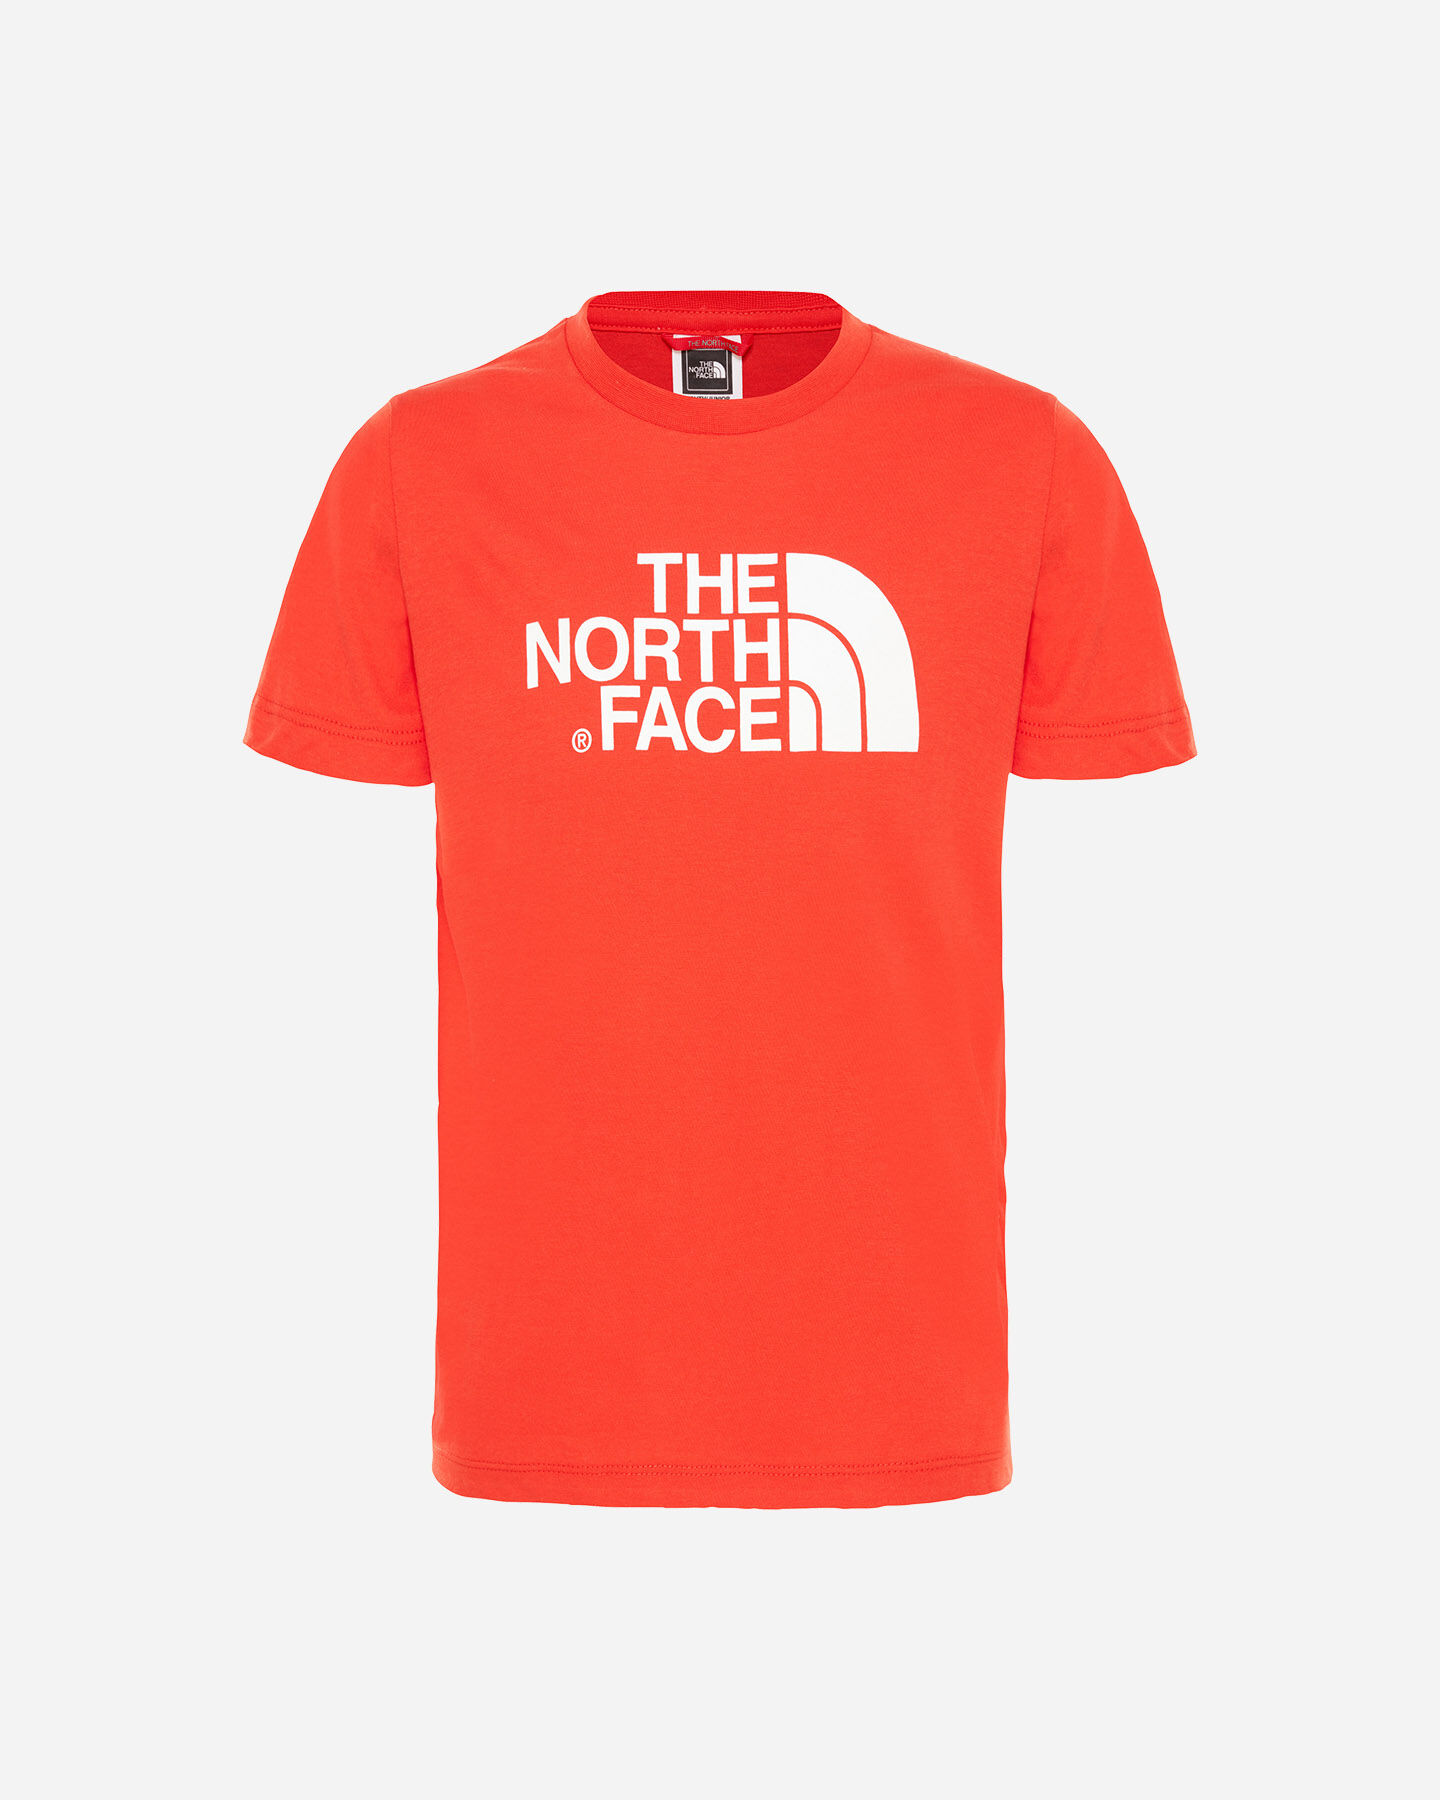  T-Shirt THE NORTH FACE EASY JR S5017303|M6J|XS scatto 0